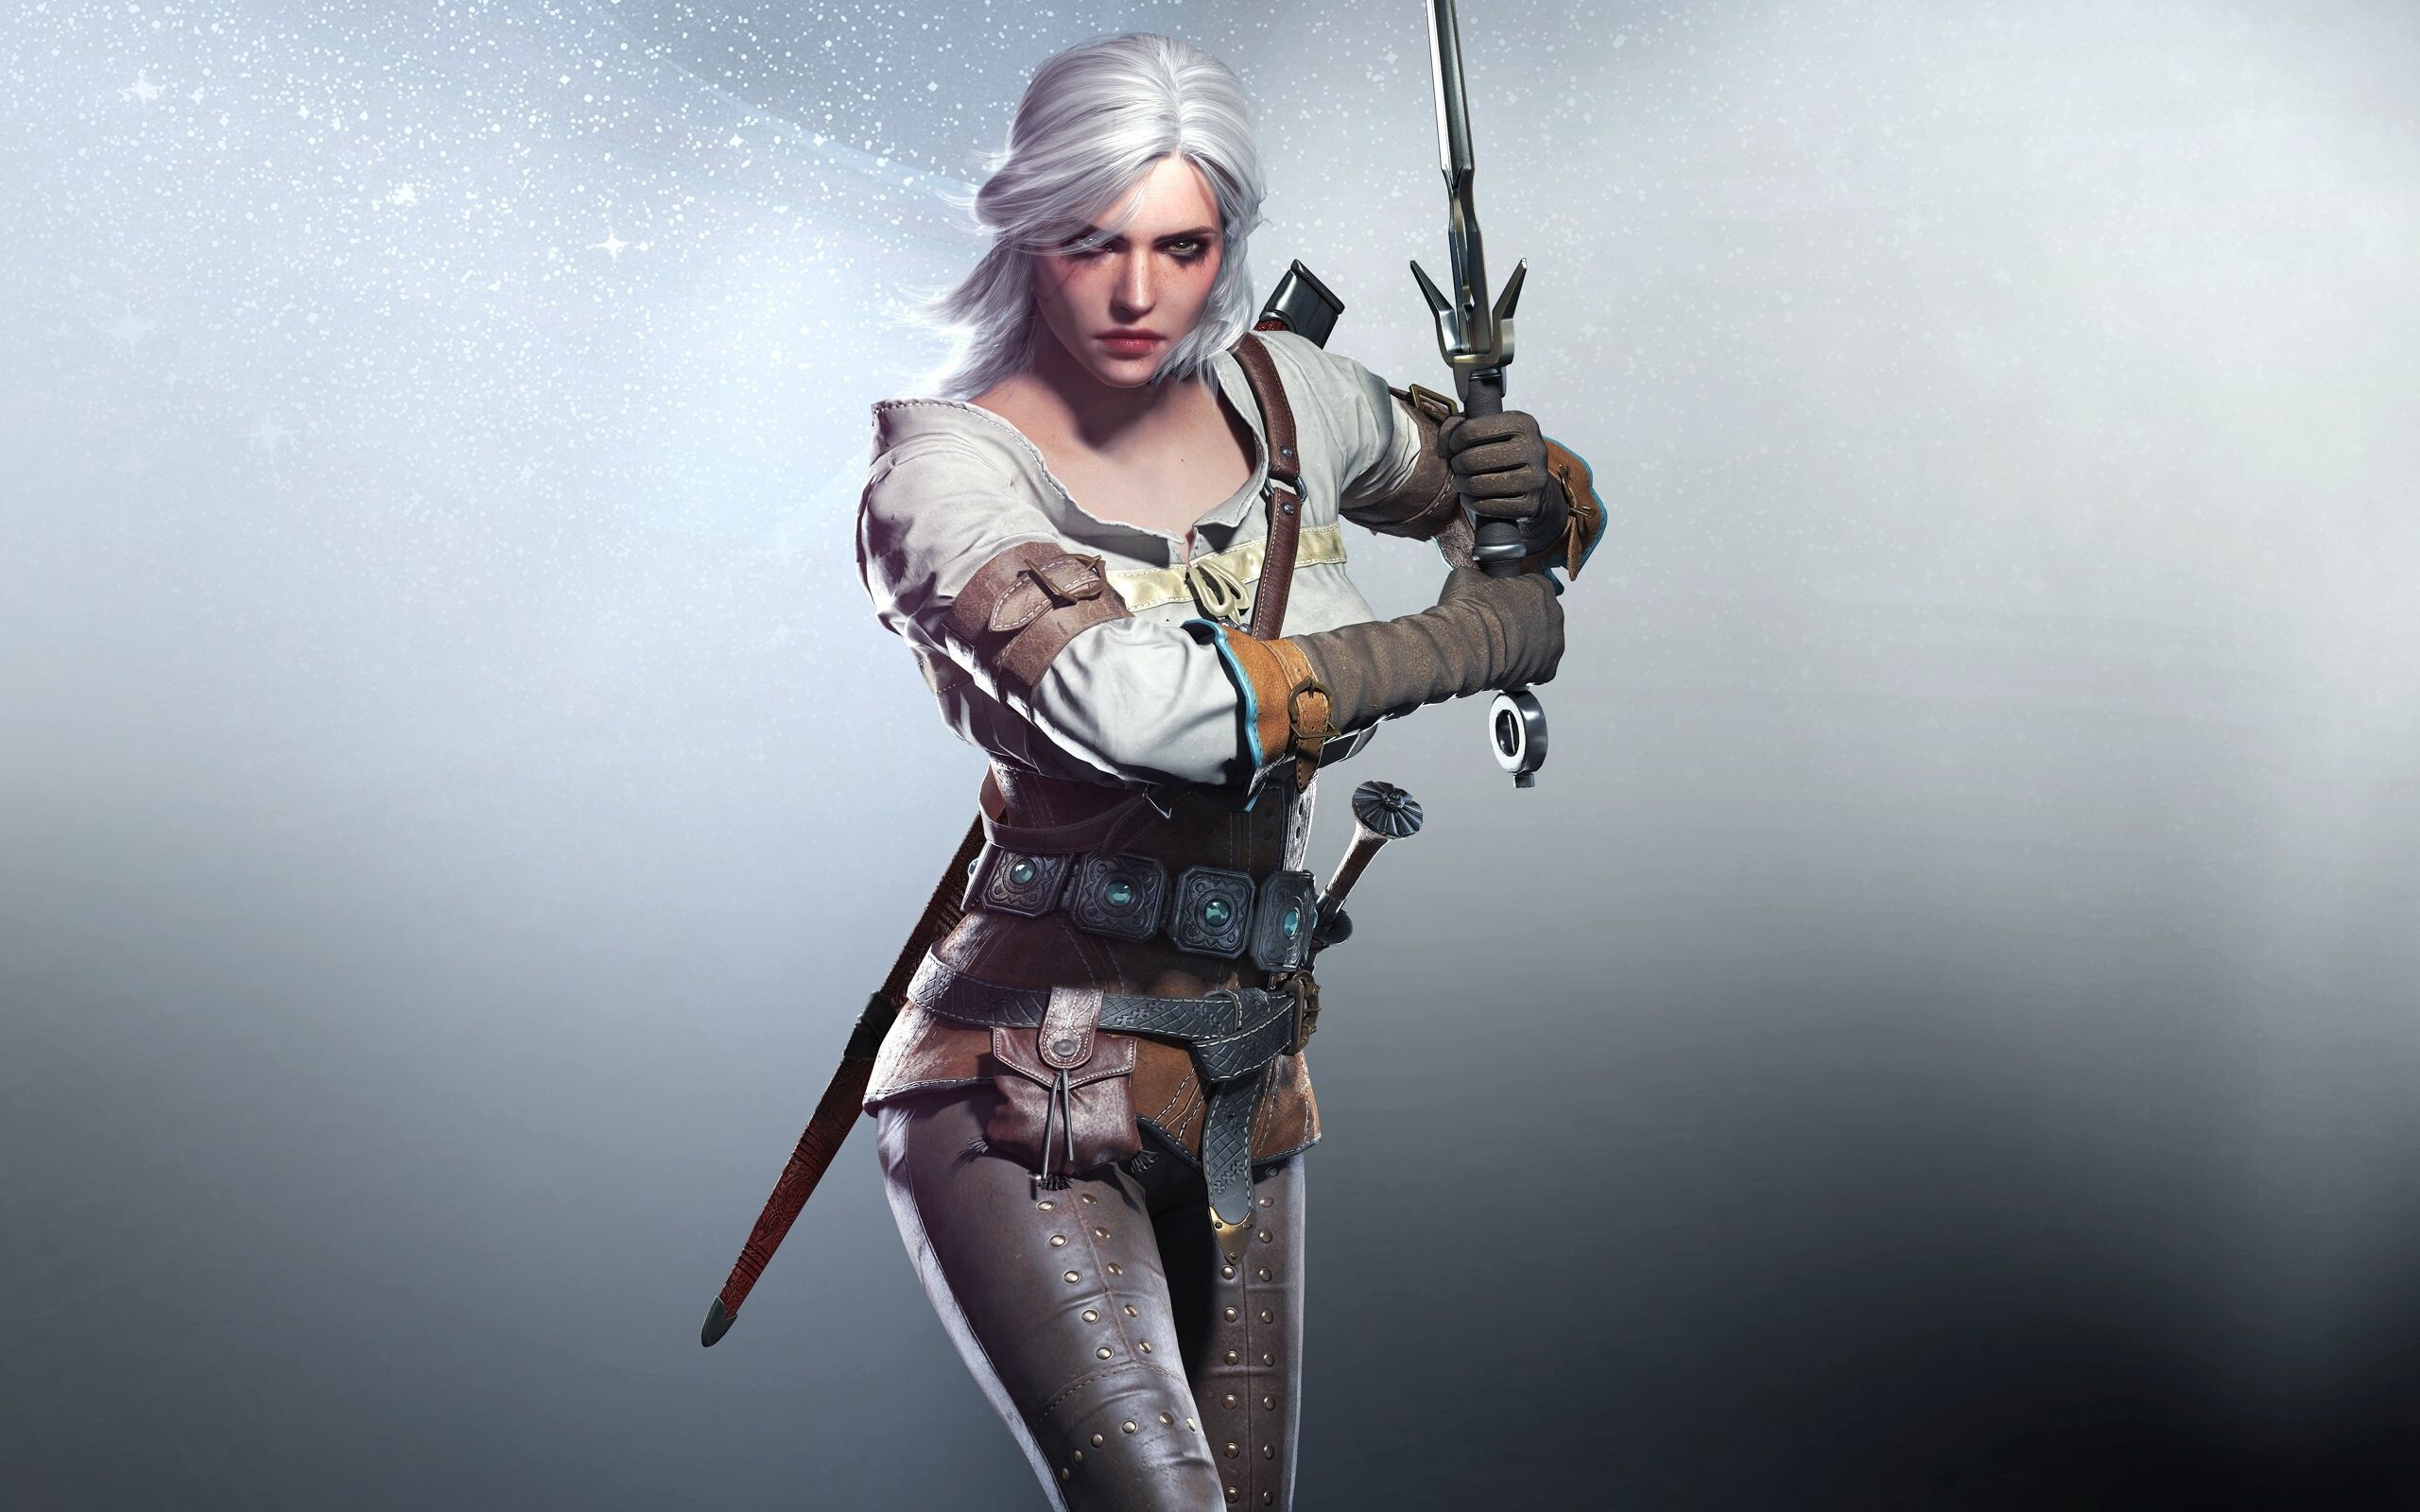 The Witcher (Game): Cirilla Fiona Elen Riannon, Commonly known simply as Ciri, The deuteragonist of the franchise. 2560x1600 HD Background.